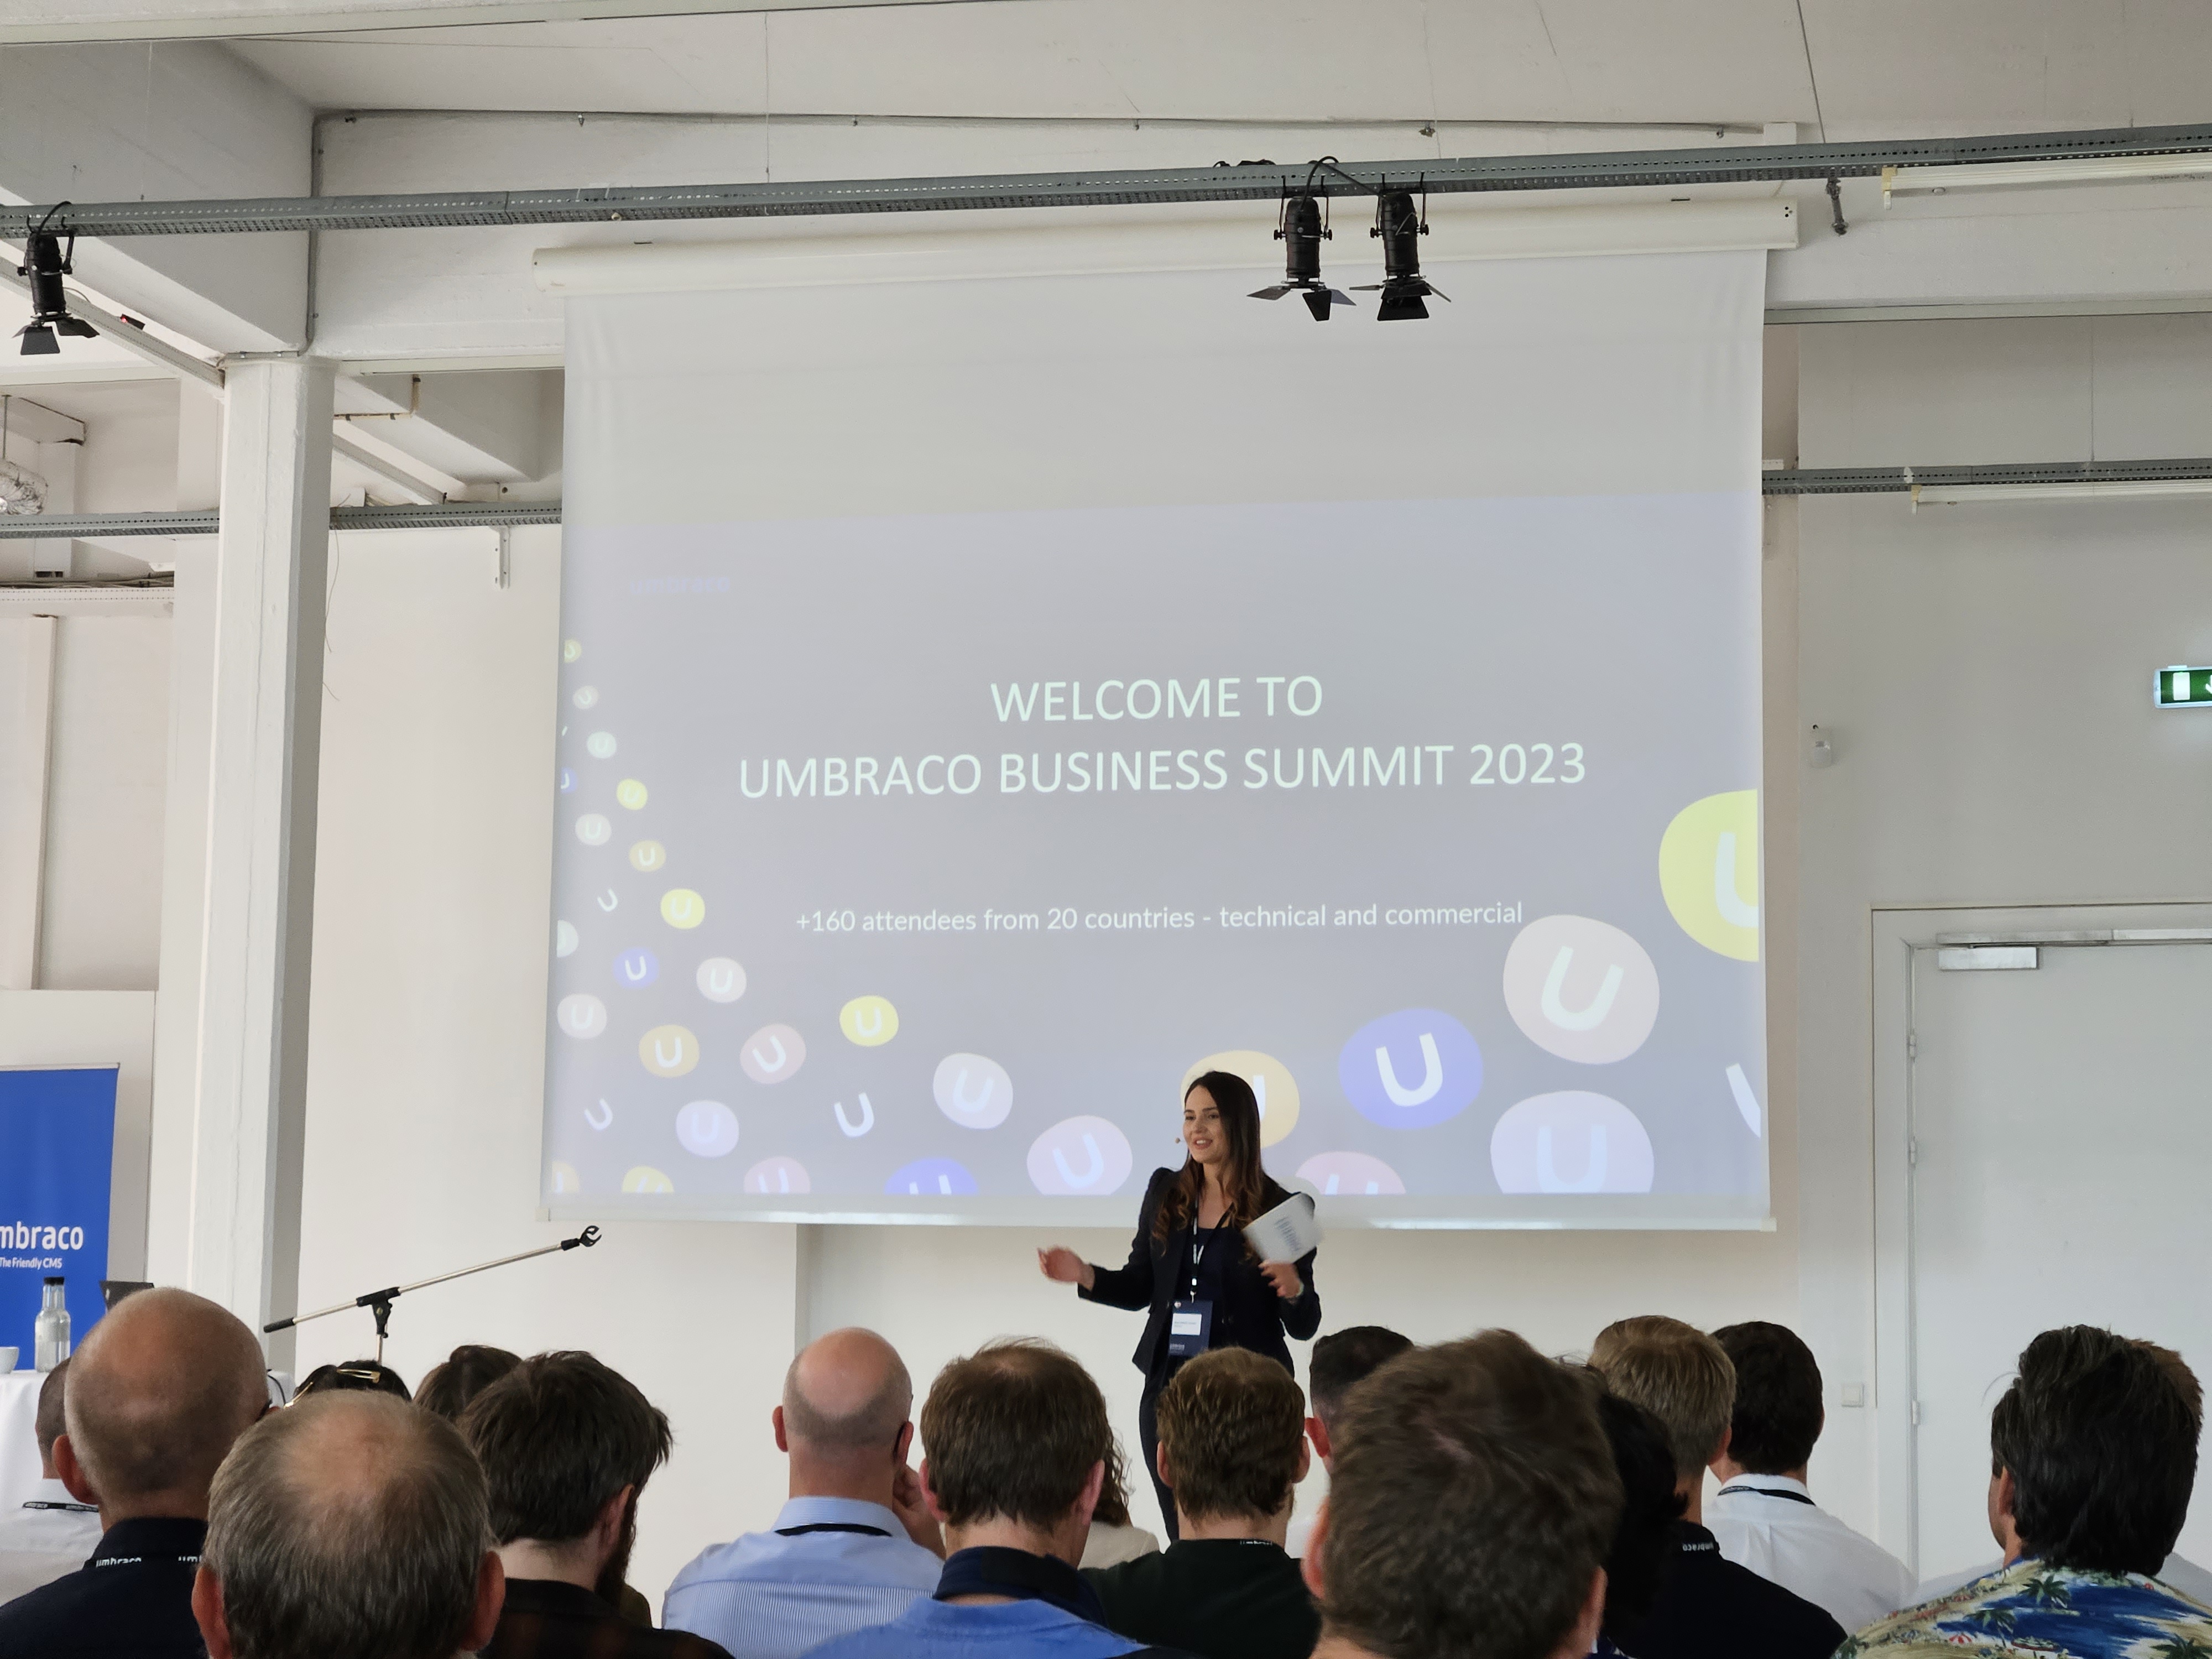 Attachment 3. Welcome to Umbraco Business Summit 2023